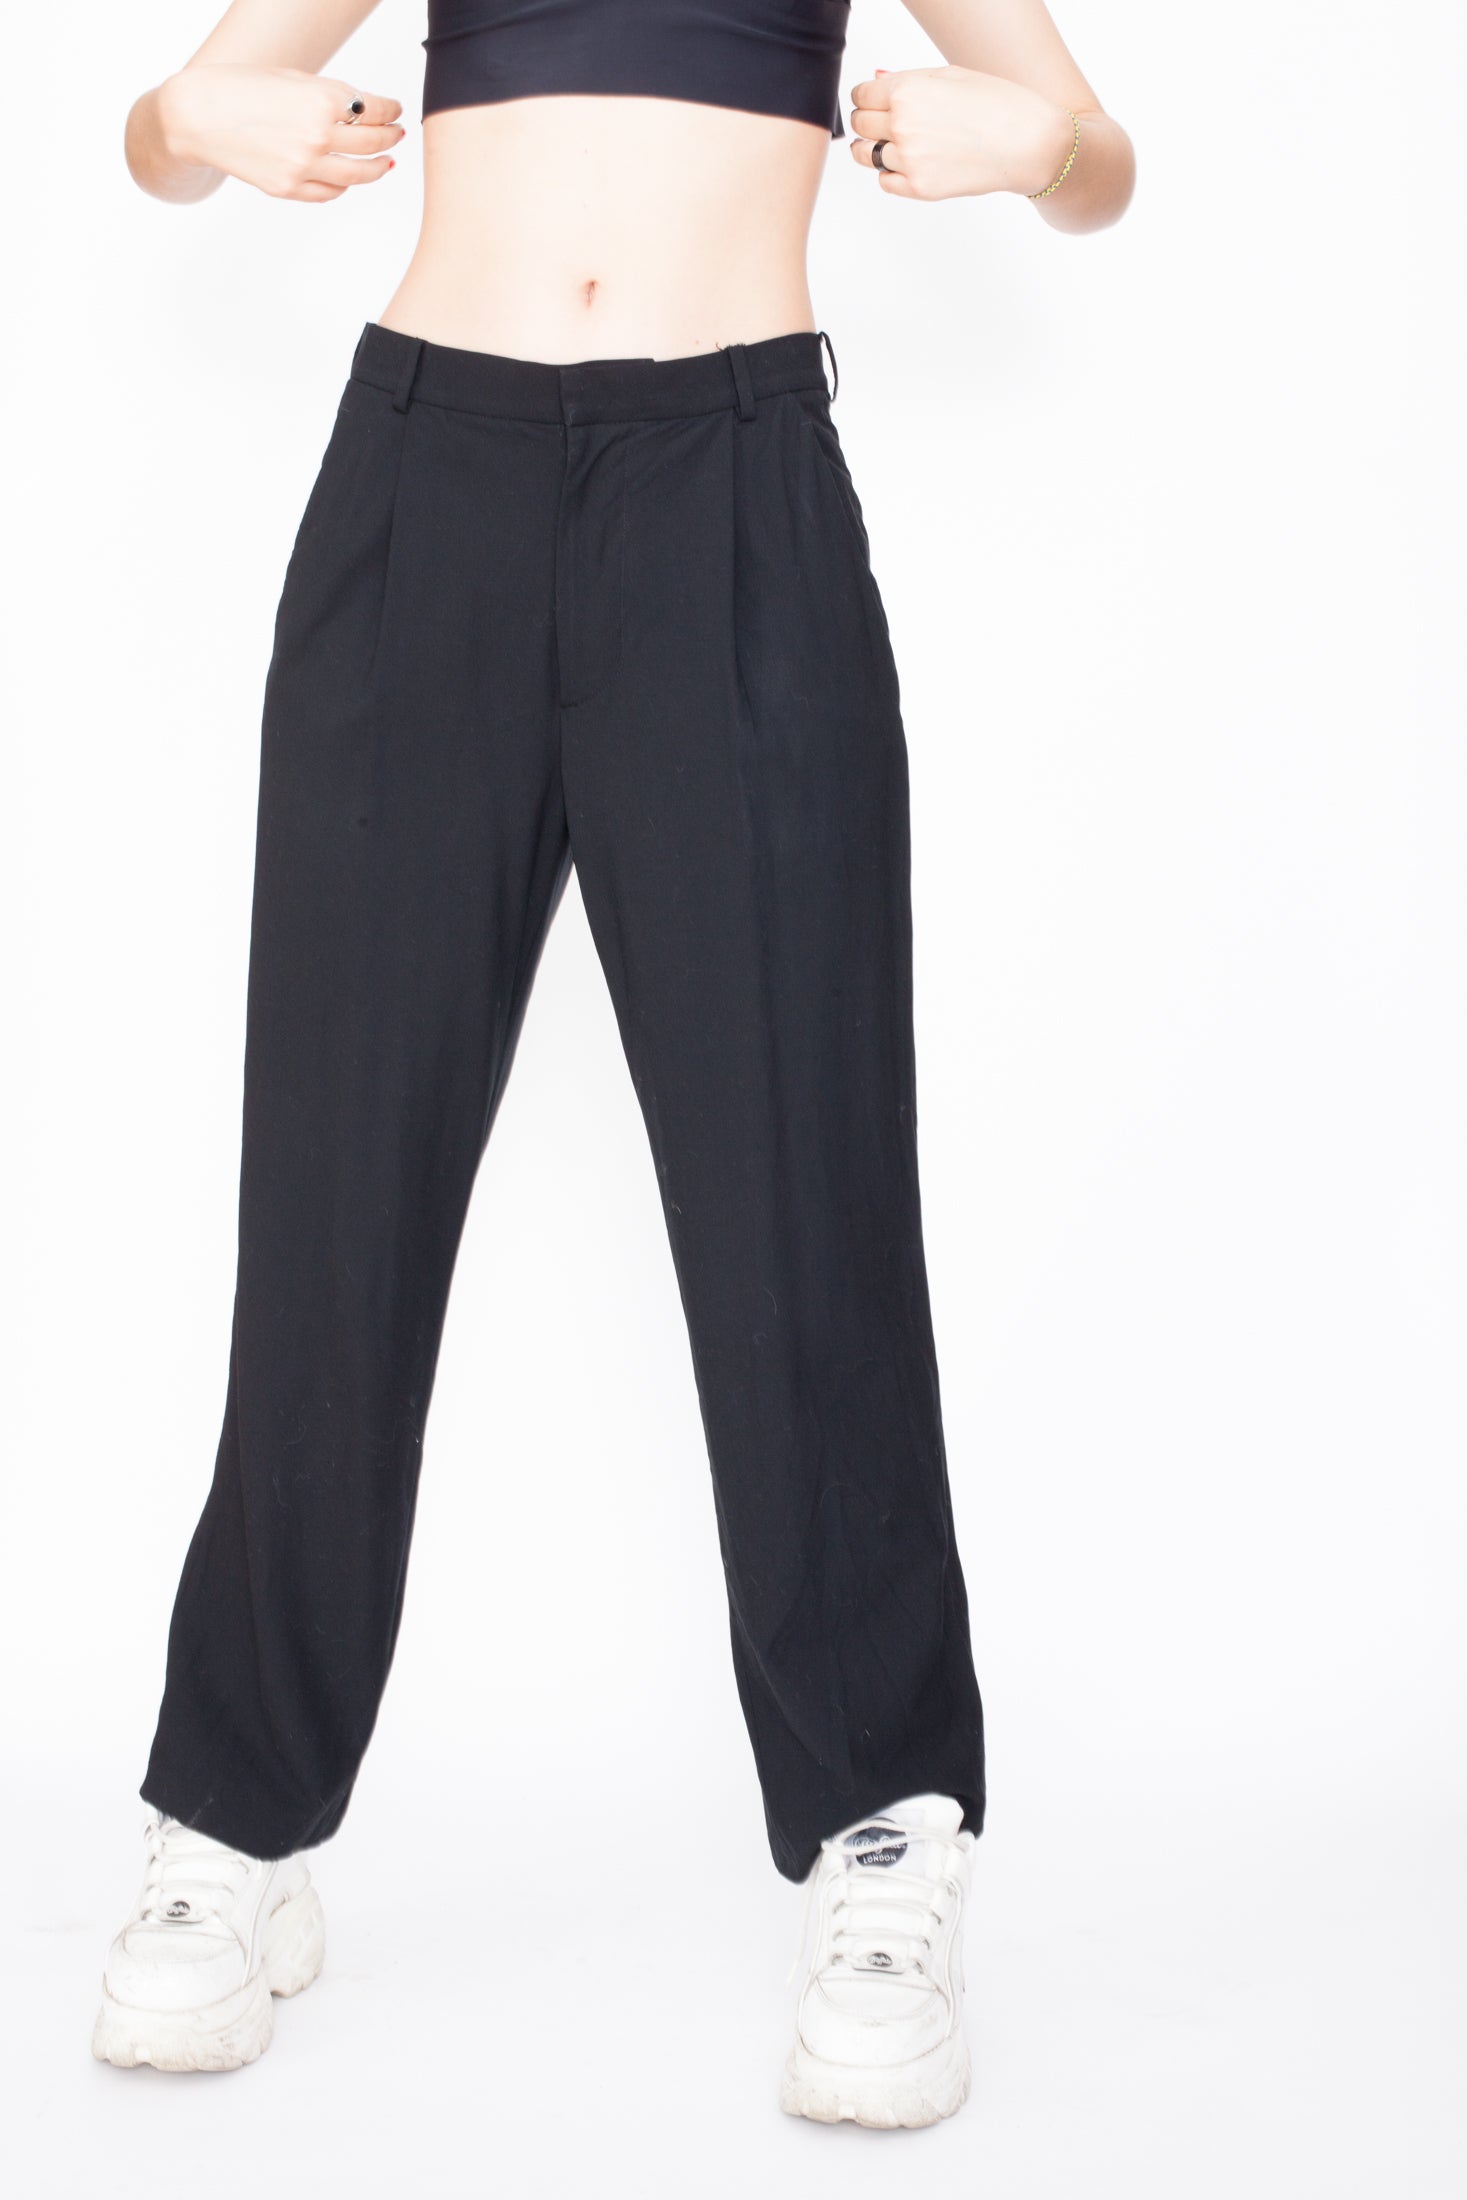 Vintage 80s Gianni Versace Work Trousers – Not Too Sweet